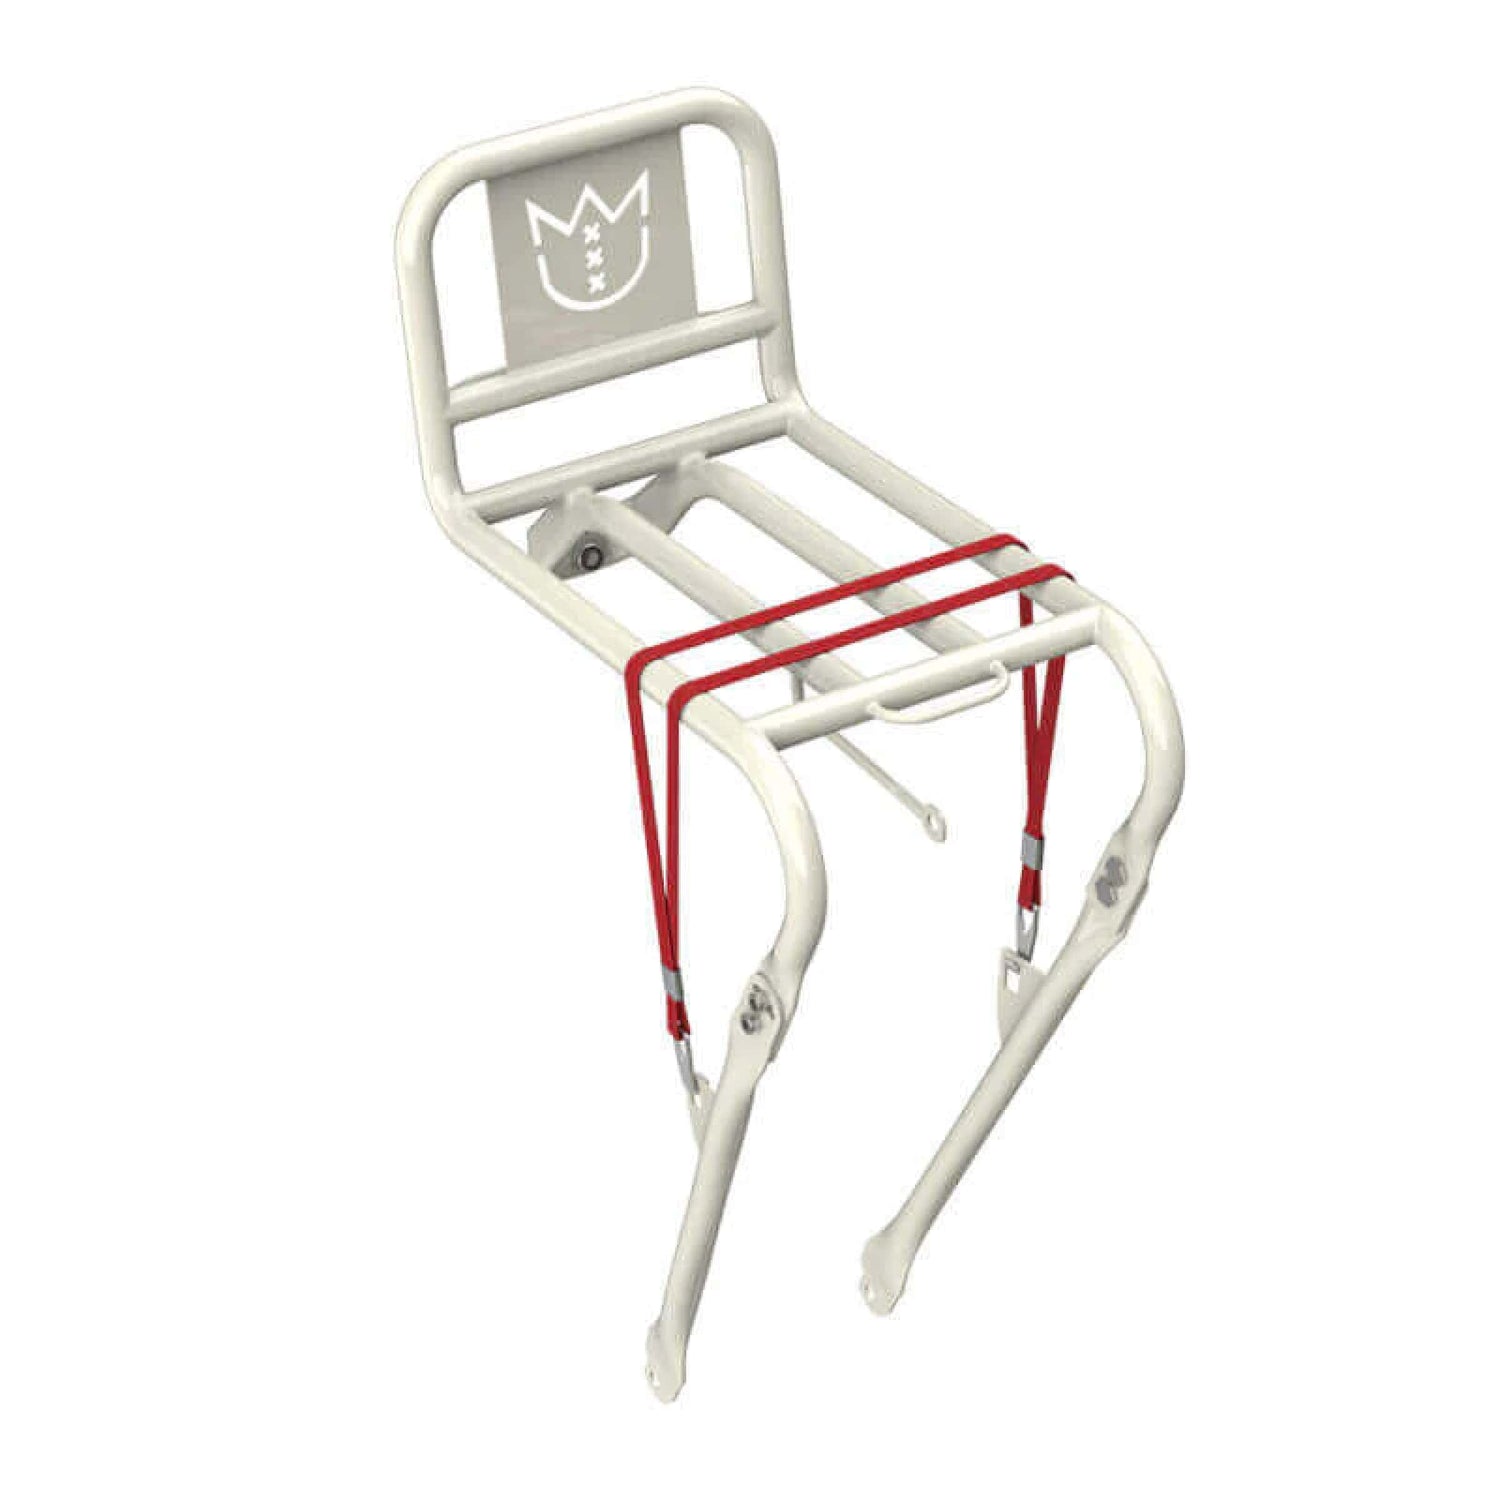 Dutch front LEKKER Bikes rack in white with bungees